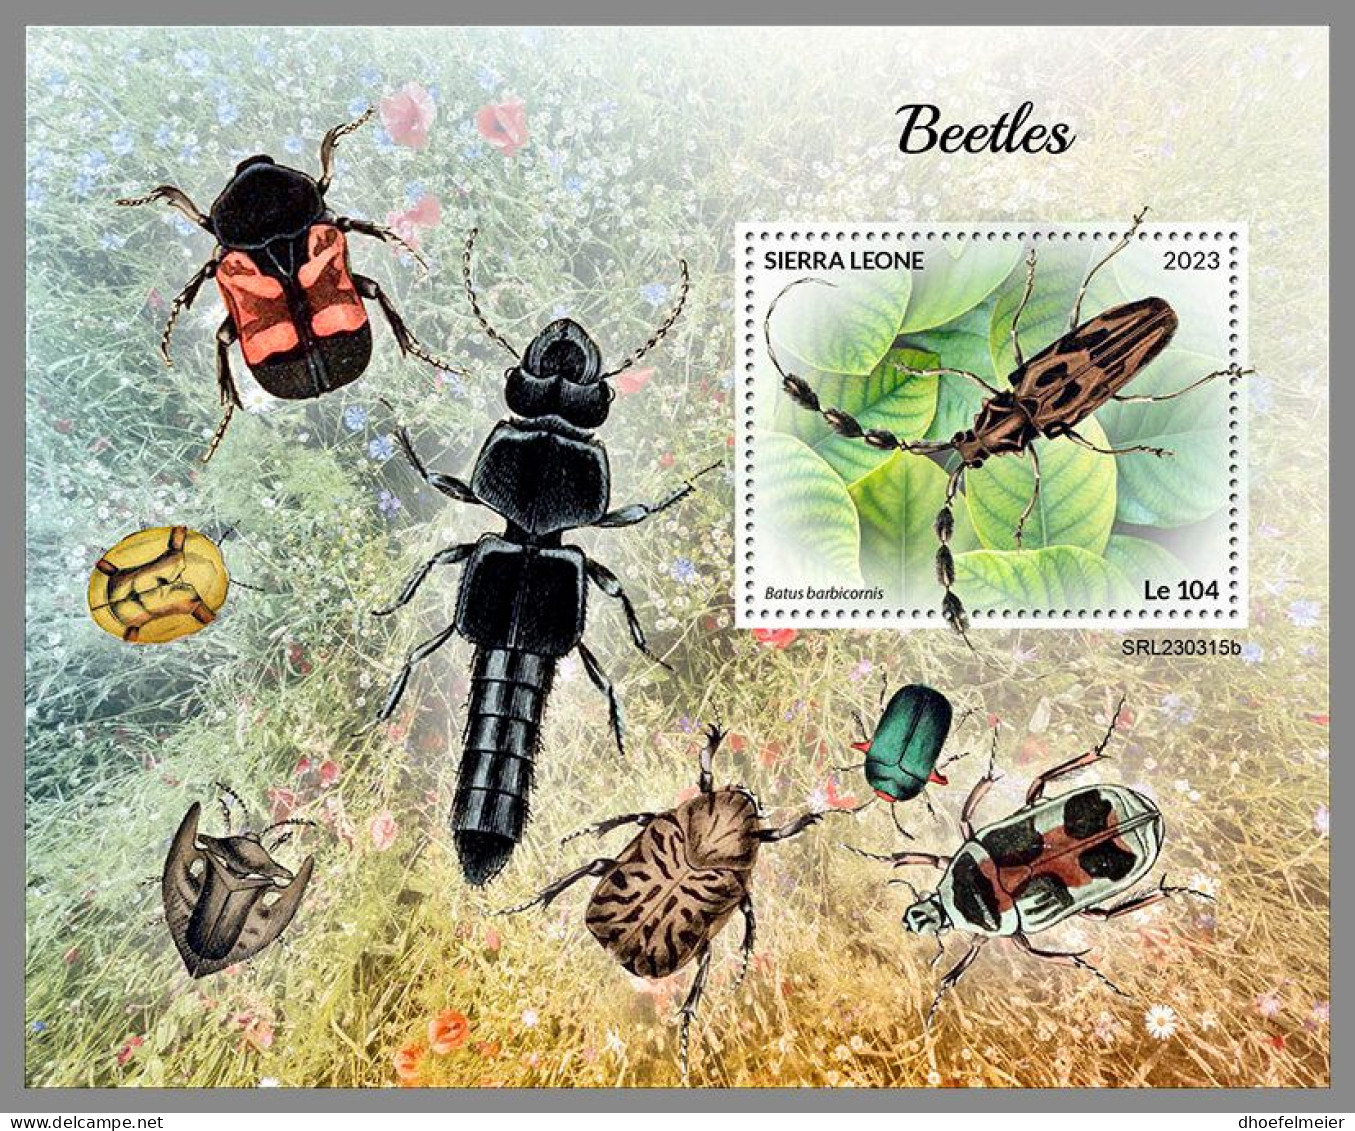 SIERRA LEONE 2023 MNH Beetles Käfer S/S – OFFICIAL ISSUE – DHQ2418 - Escarabajos